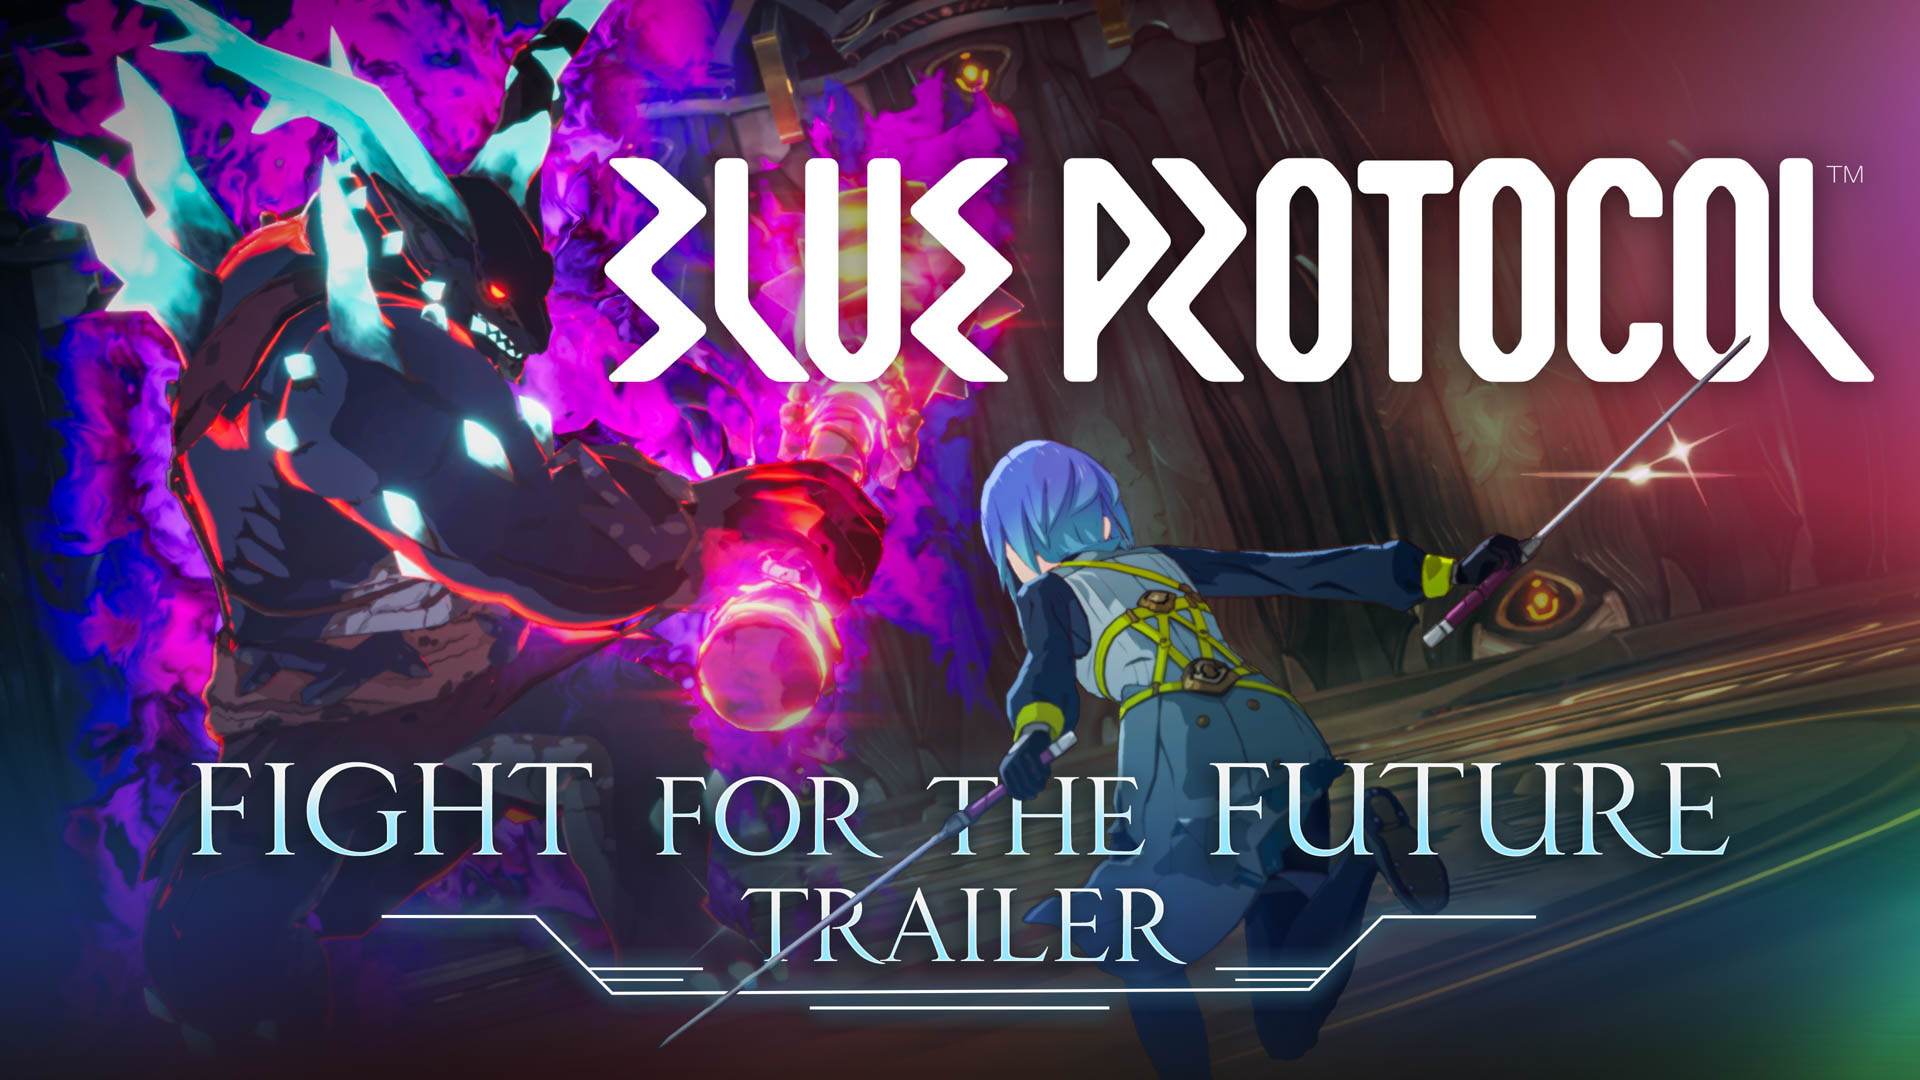 What's Blue Protocol And is it a Better Online Anime JRPG Than